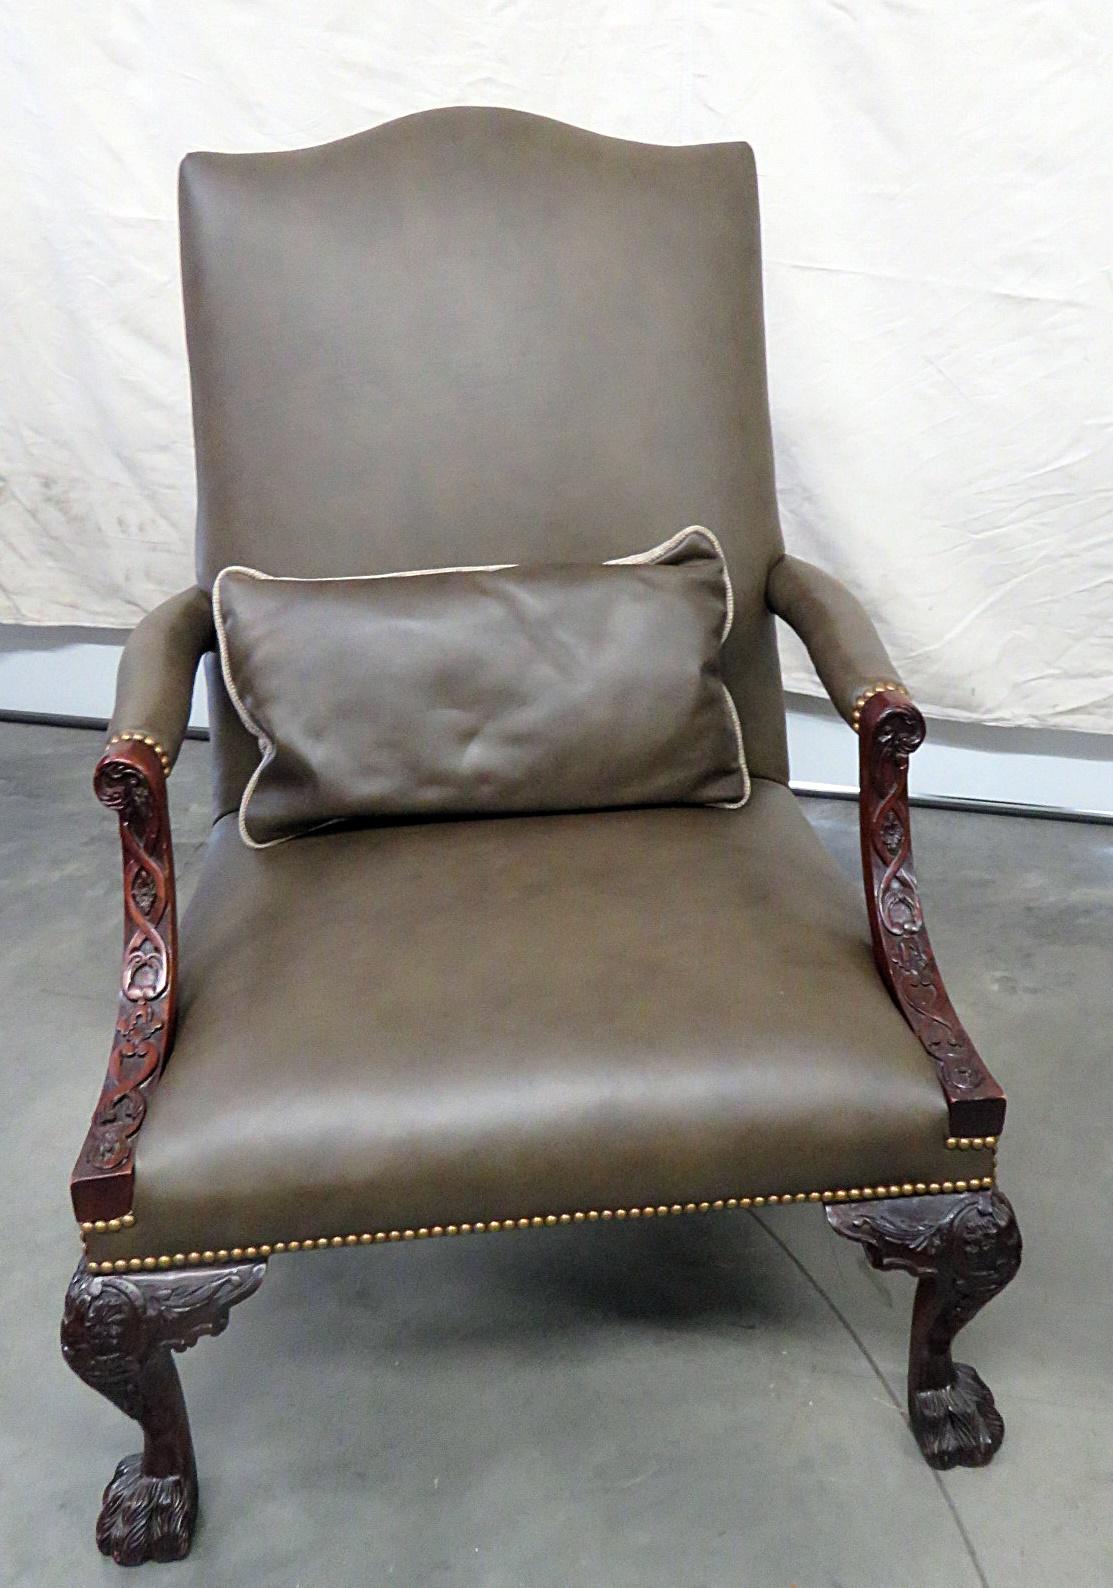 This is a gorgeous pair of Georgian style armchairs with leather upholstery, hairy paw feet, nailhead trim and matching accent pillows. They are in good condition and have beautifully carved frames.